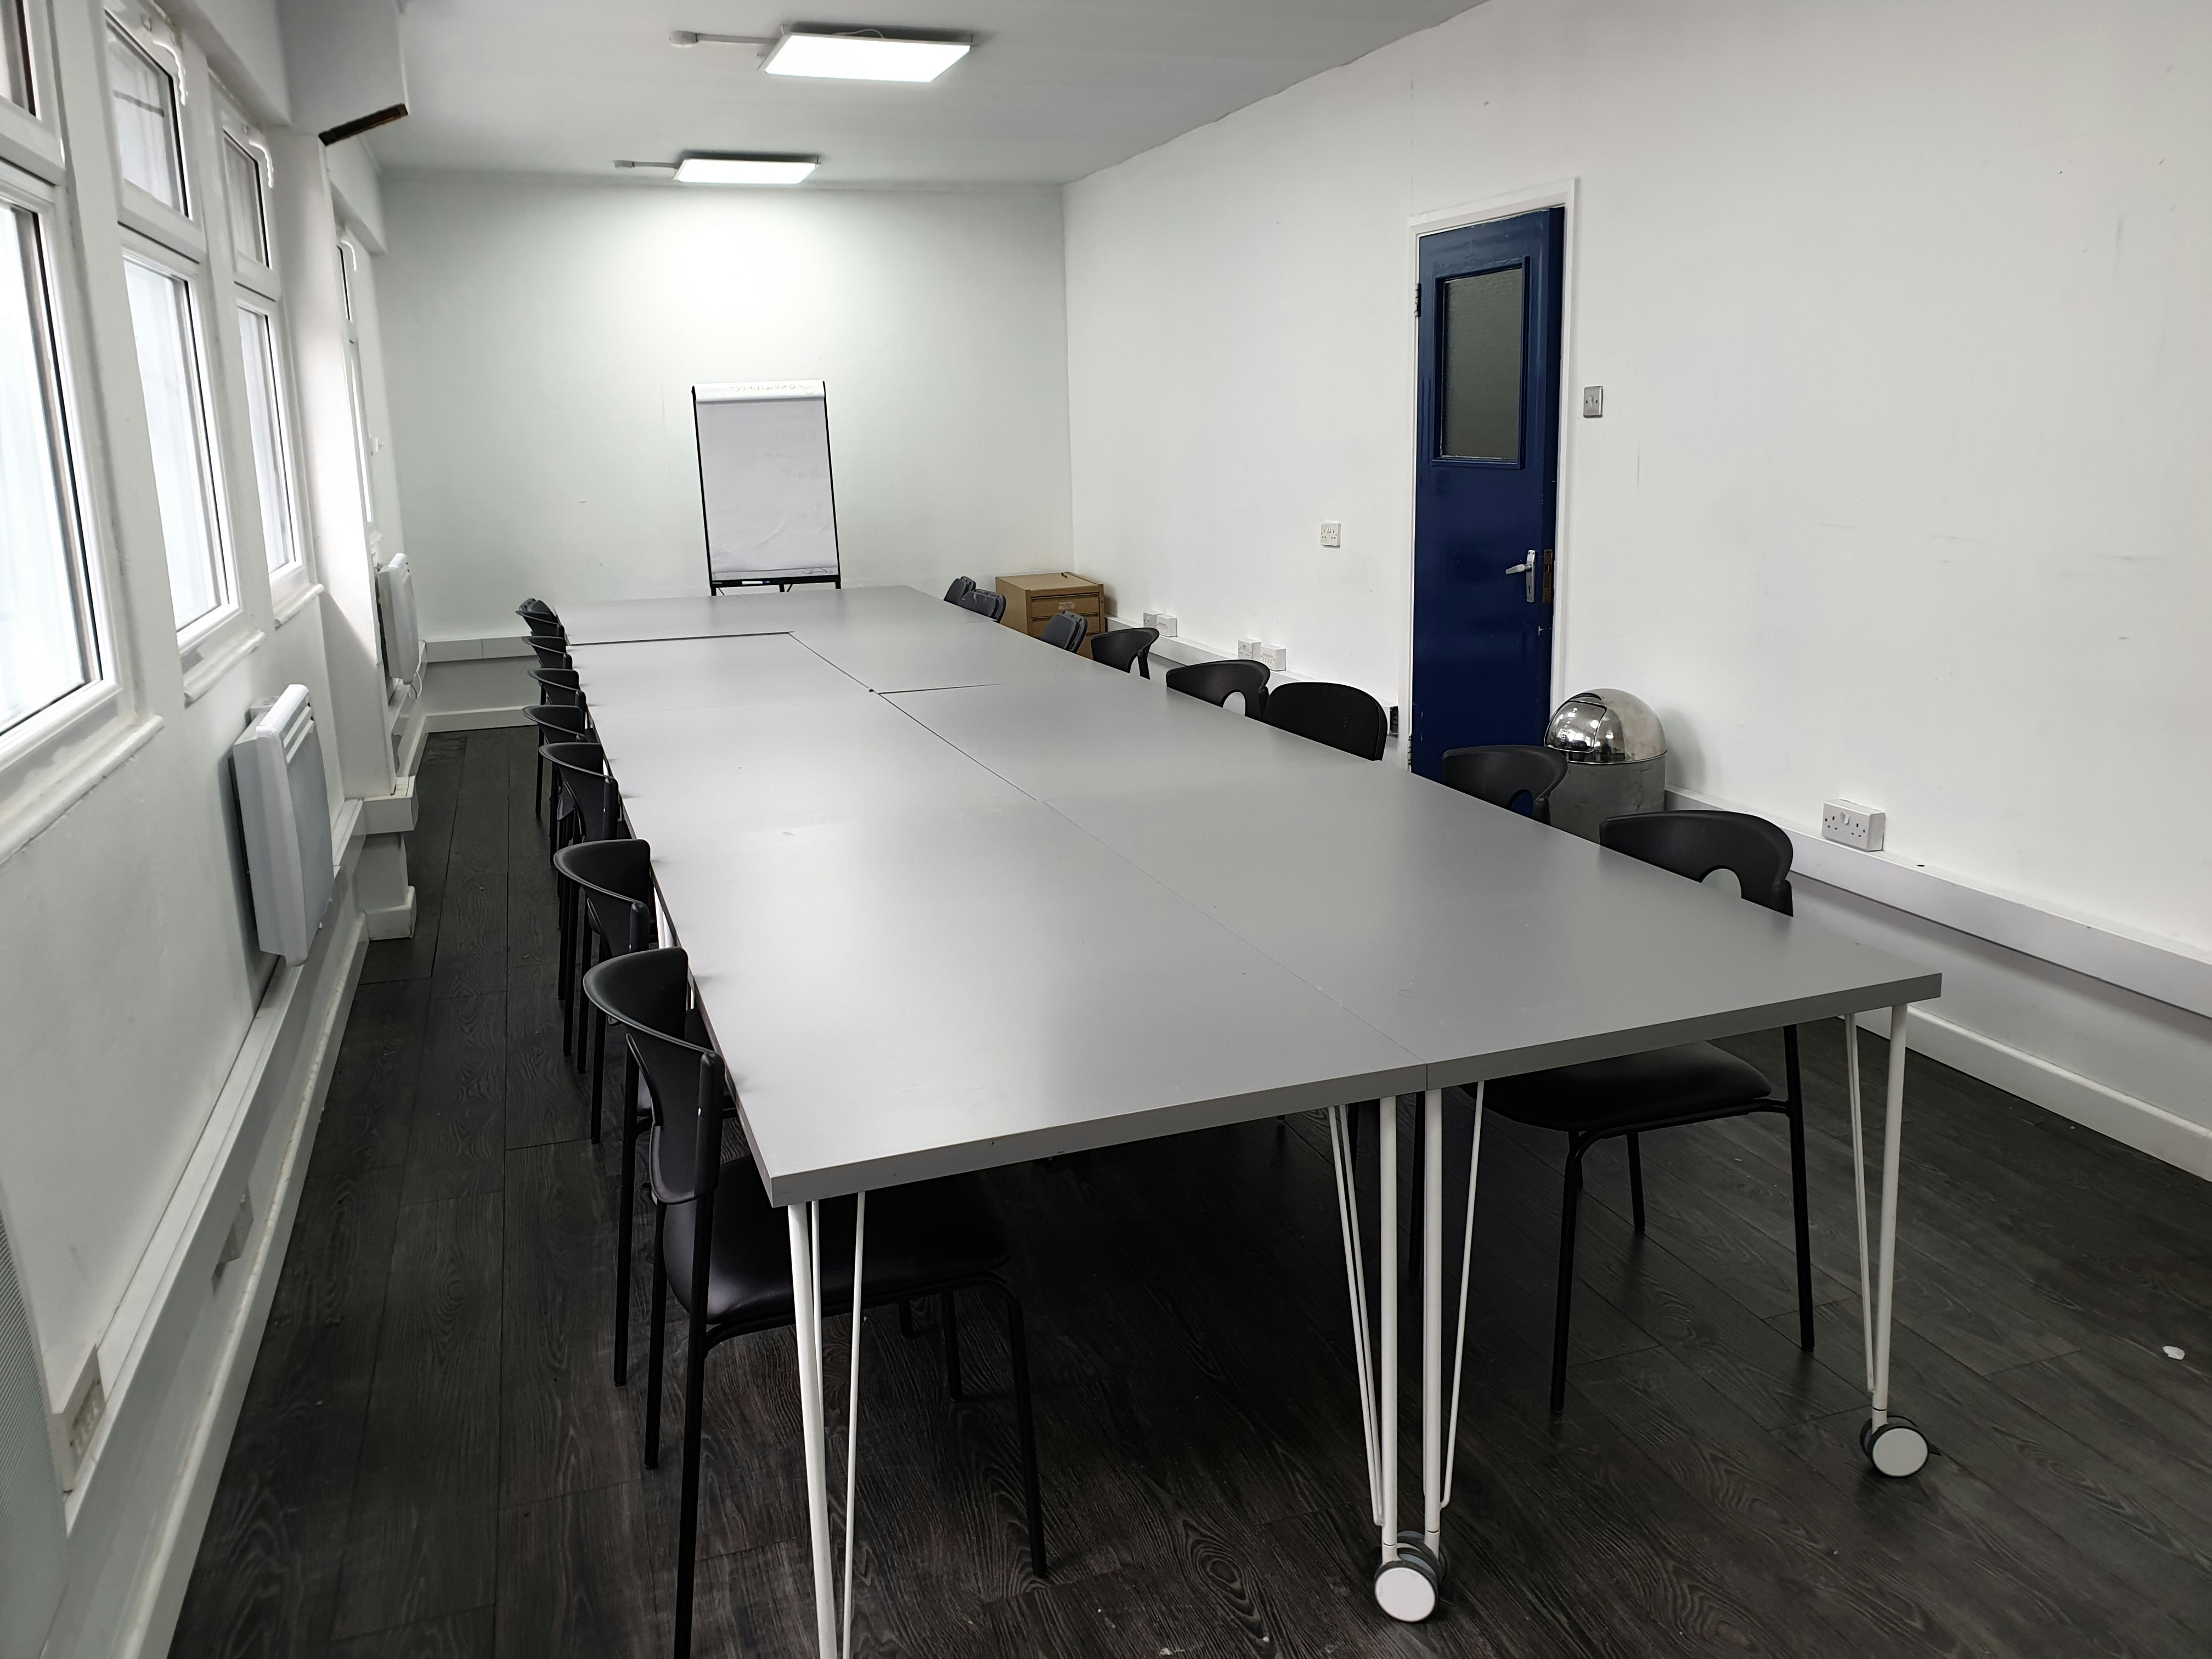 Colombo Sports & Community Centre - Office/Training Room 2 image 2